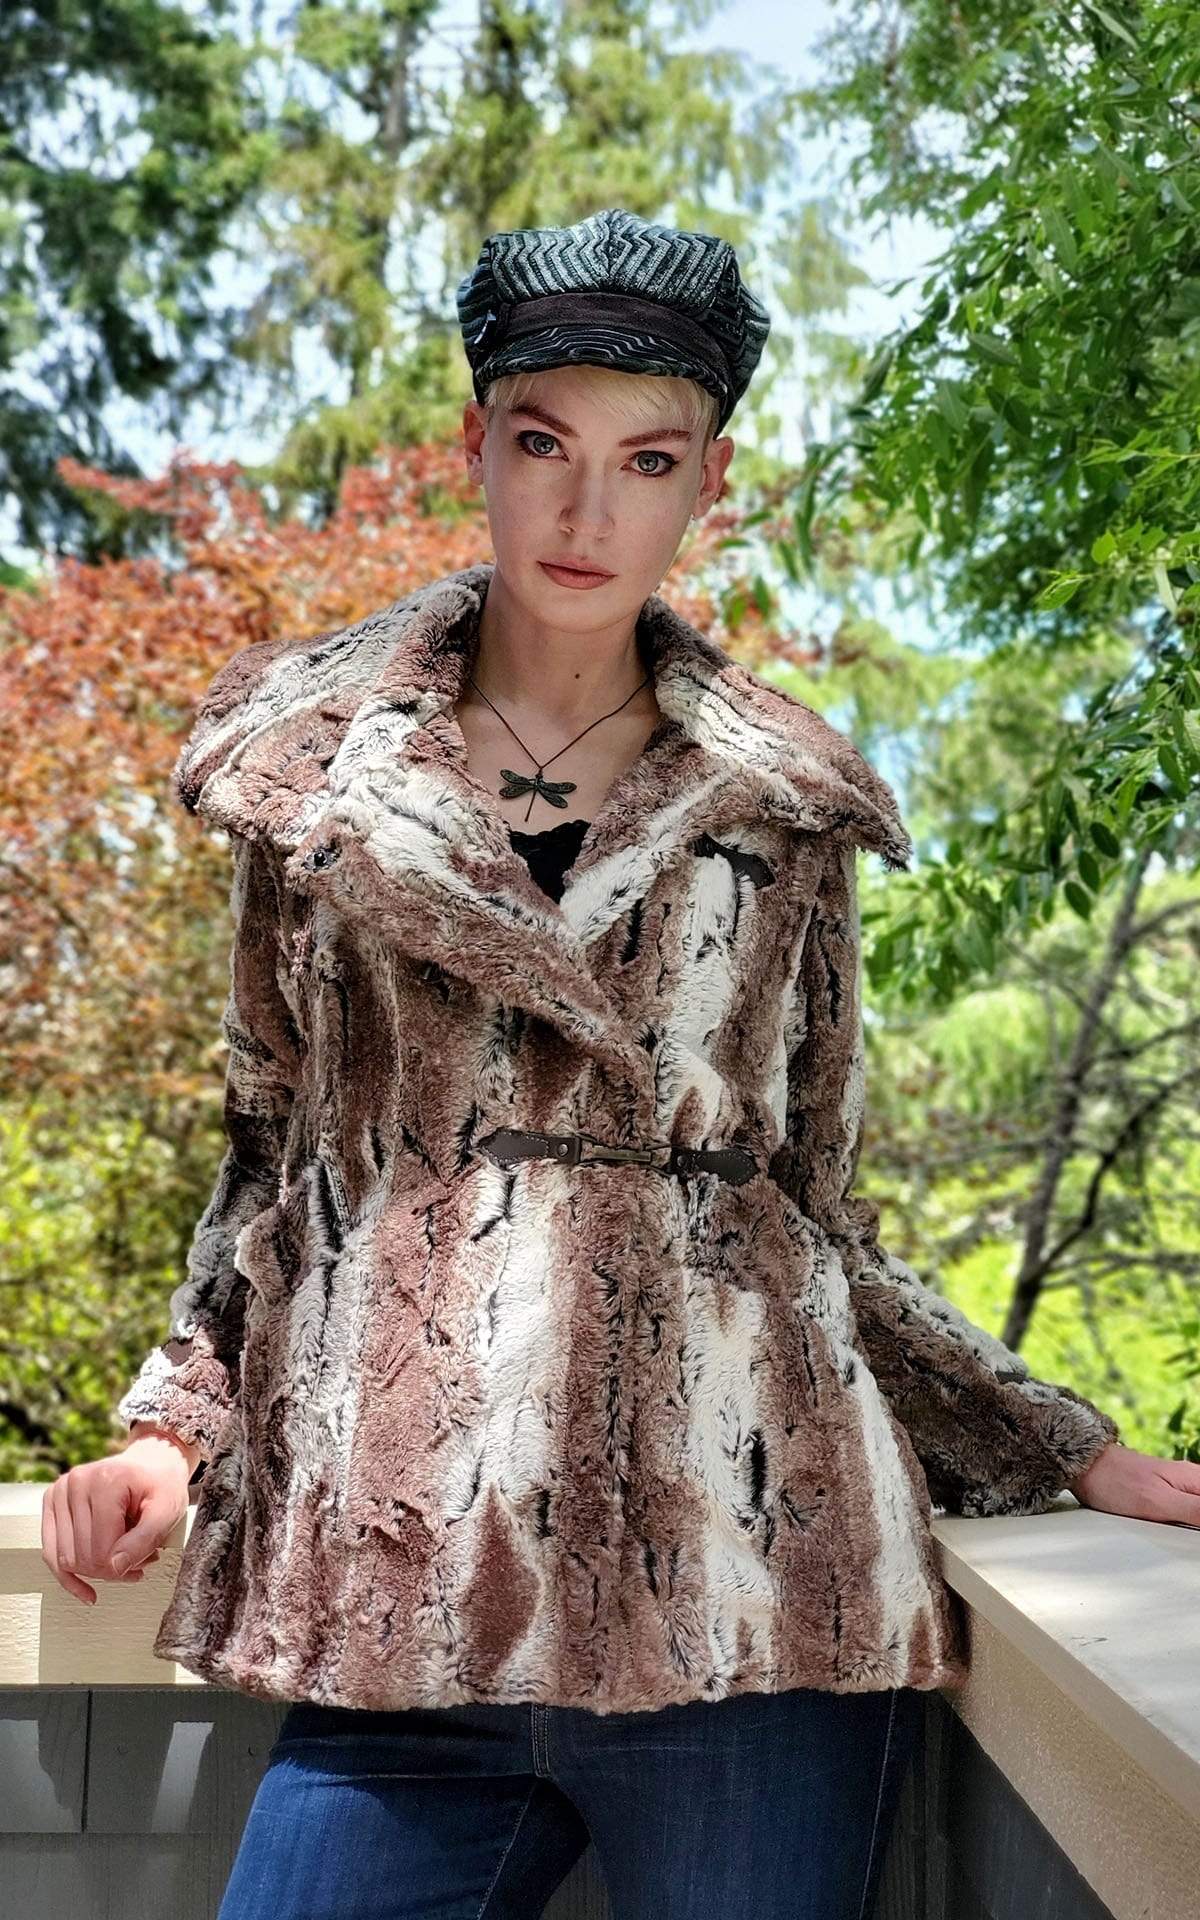 Model leaning on a wood railing Dietrich Coat | Birch Brown and Ivory Faux Fur Pea Coat | Featuring Buckle Clasps | Handmade in Seattle, WA | Pandemonium Millinery